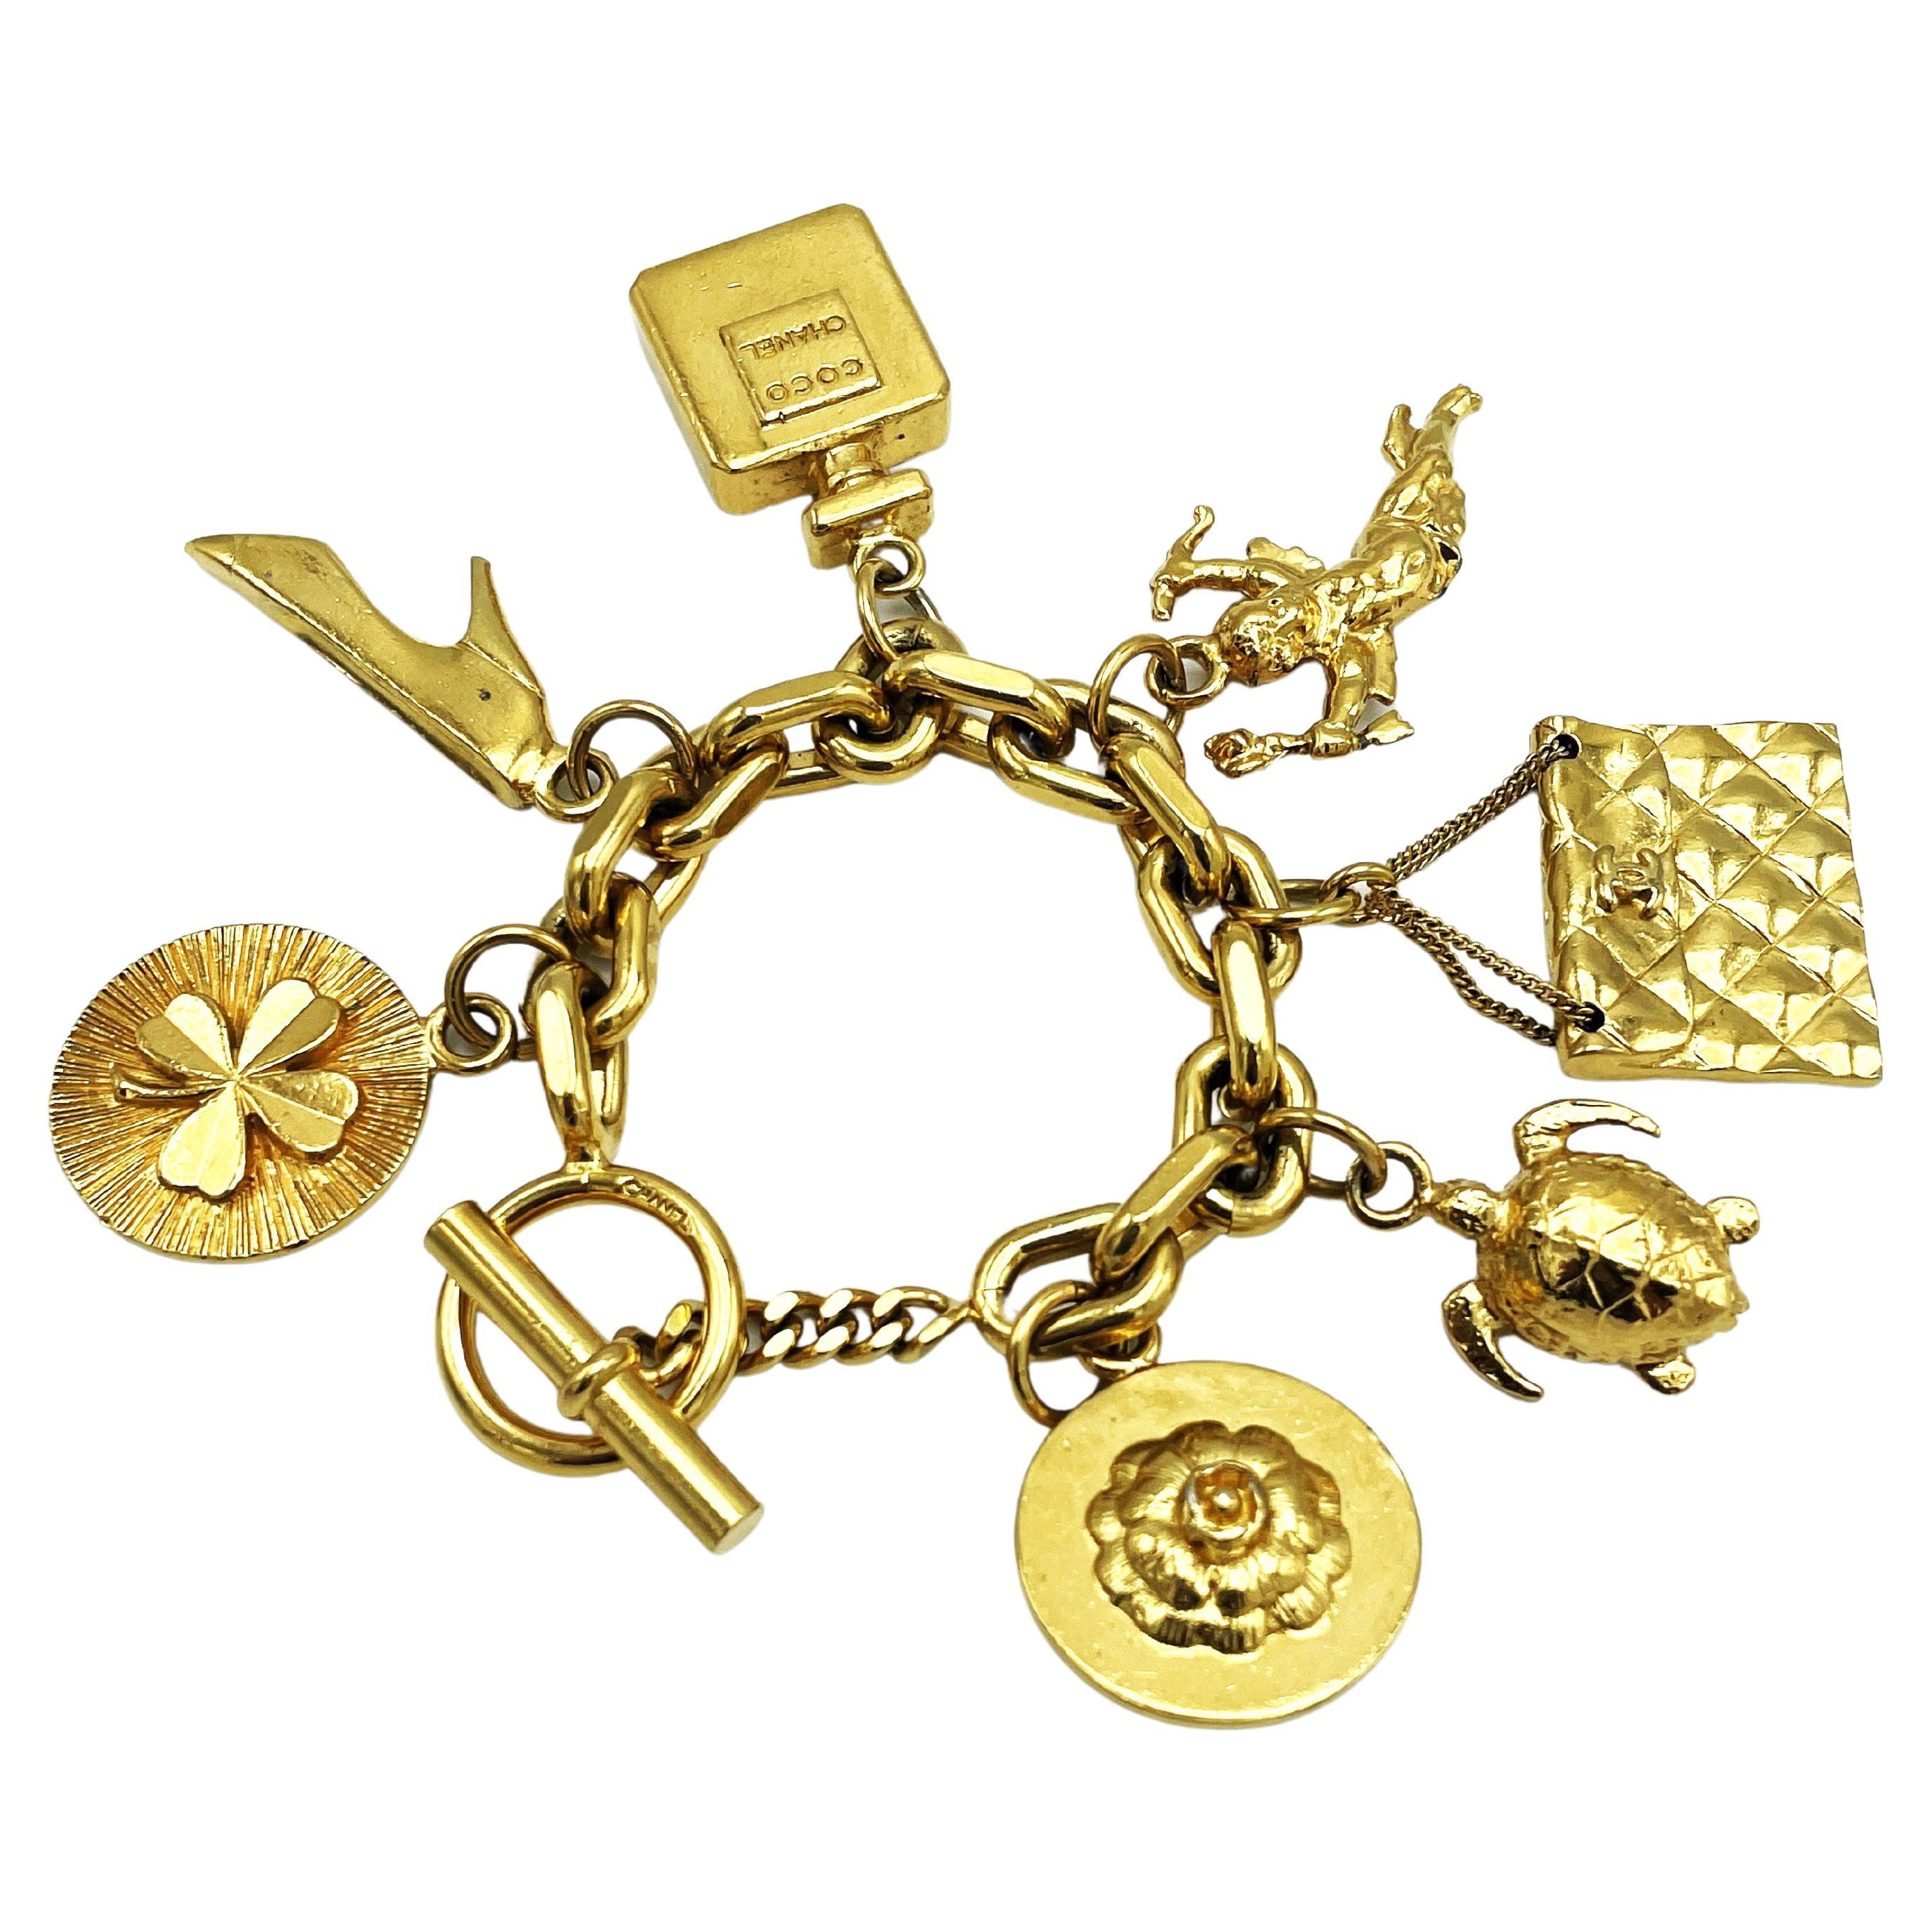 CHANEL lucky charm bracelet with 7 iconic Chanel pendants gold-plated, 1990 For Sale